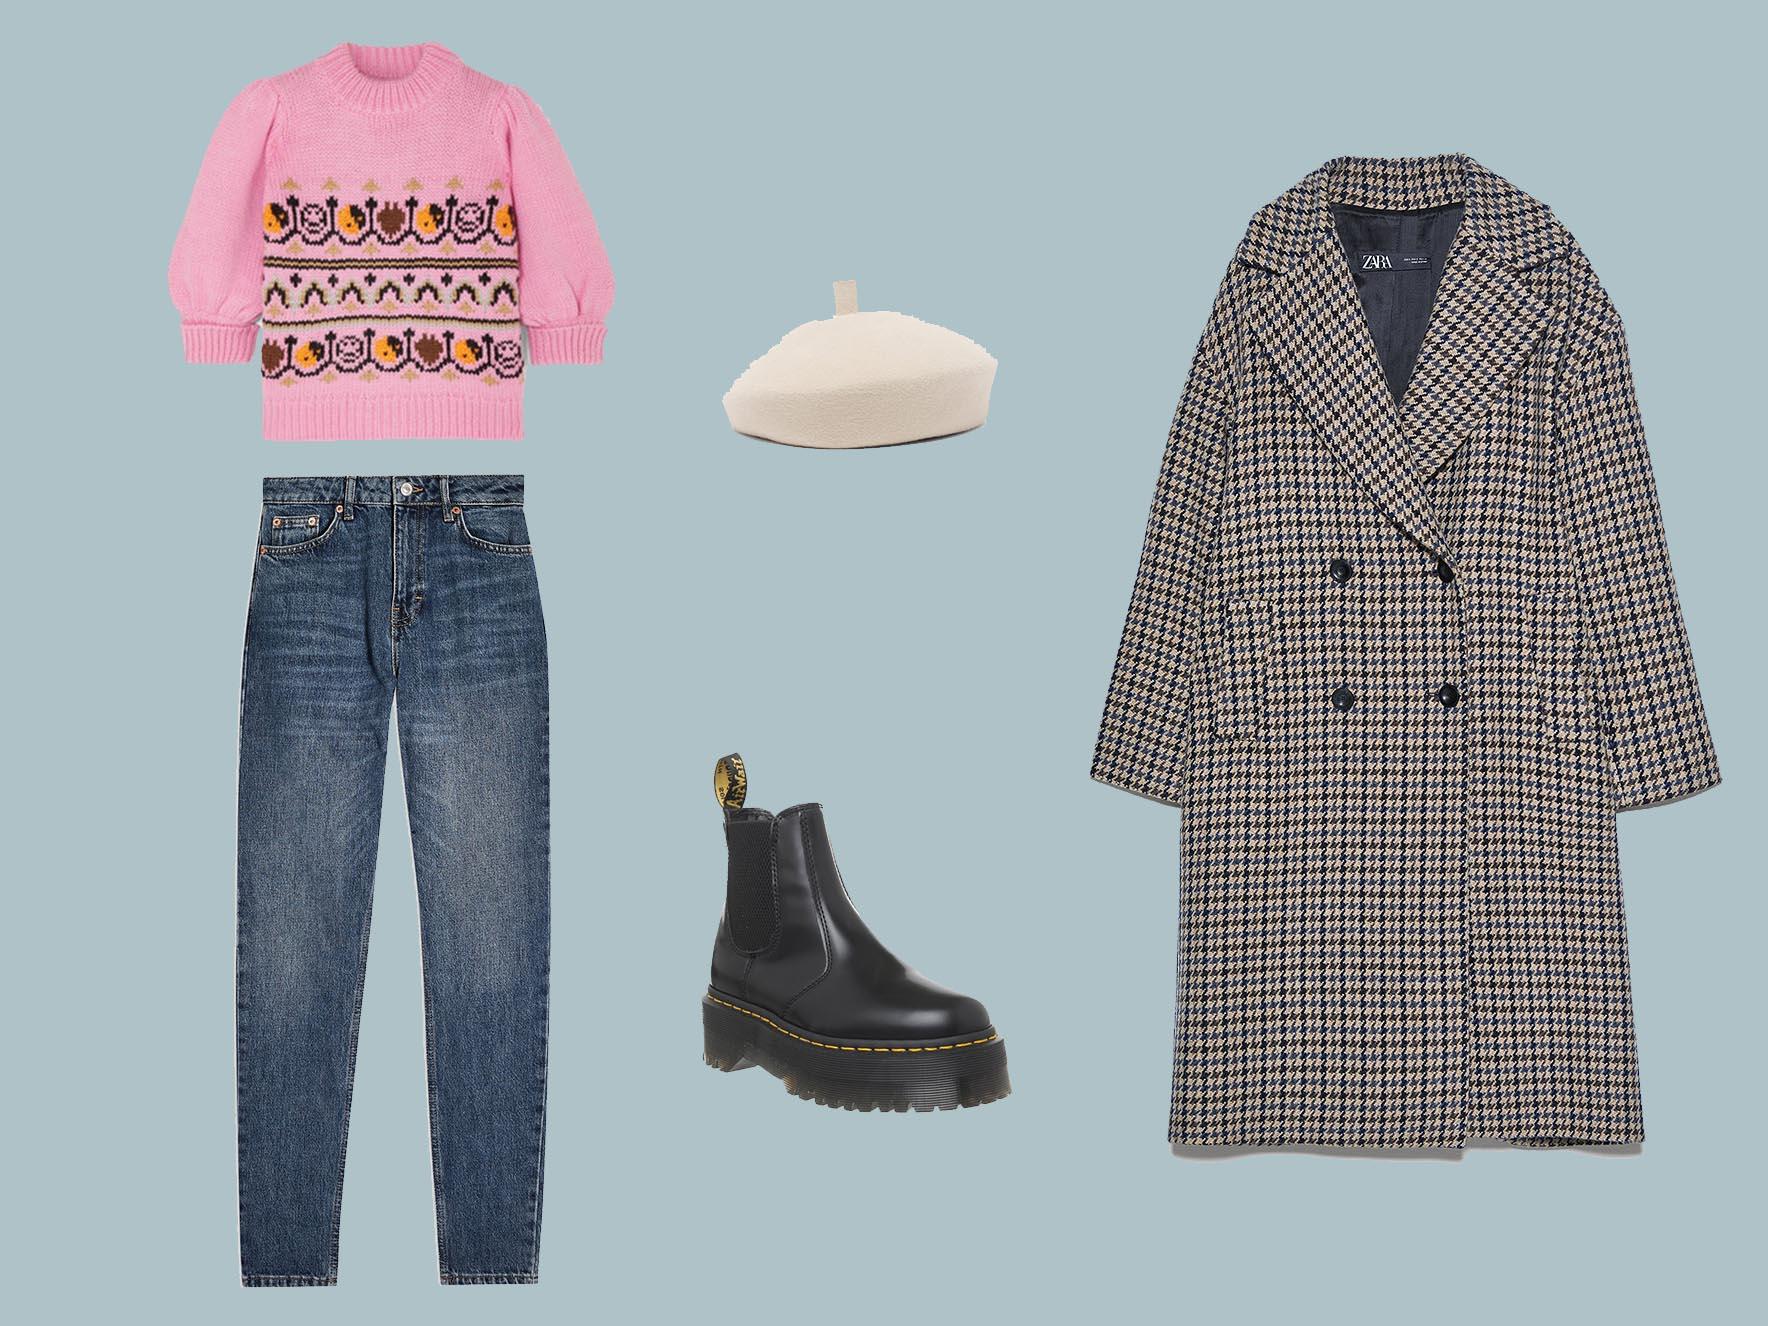 Ganni Intarsia Wool and Alpaca-Blend Sweater, £370, Net-a-Porter; Rich Blue Mom Jeans, £40, Topshop; Check Coat, £99.99, Zara; Dr Martens Quad Chelsea Boots, £169, Office; Lola Hats Frenchy Felt Beret, £325, Matches Fashion